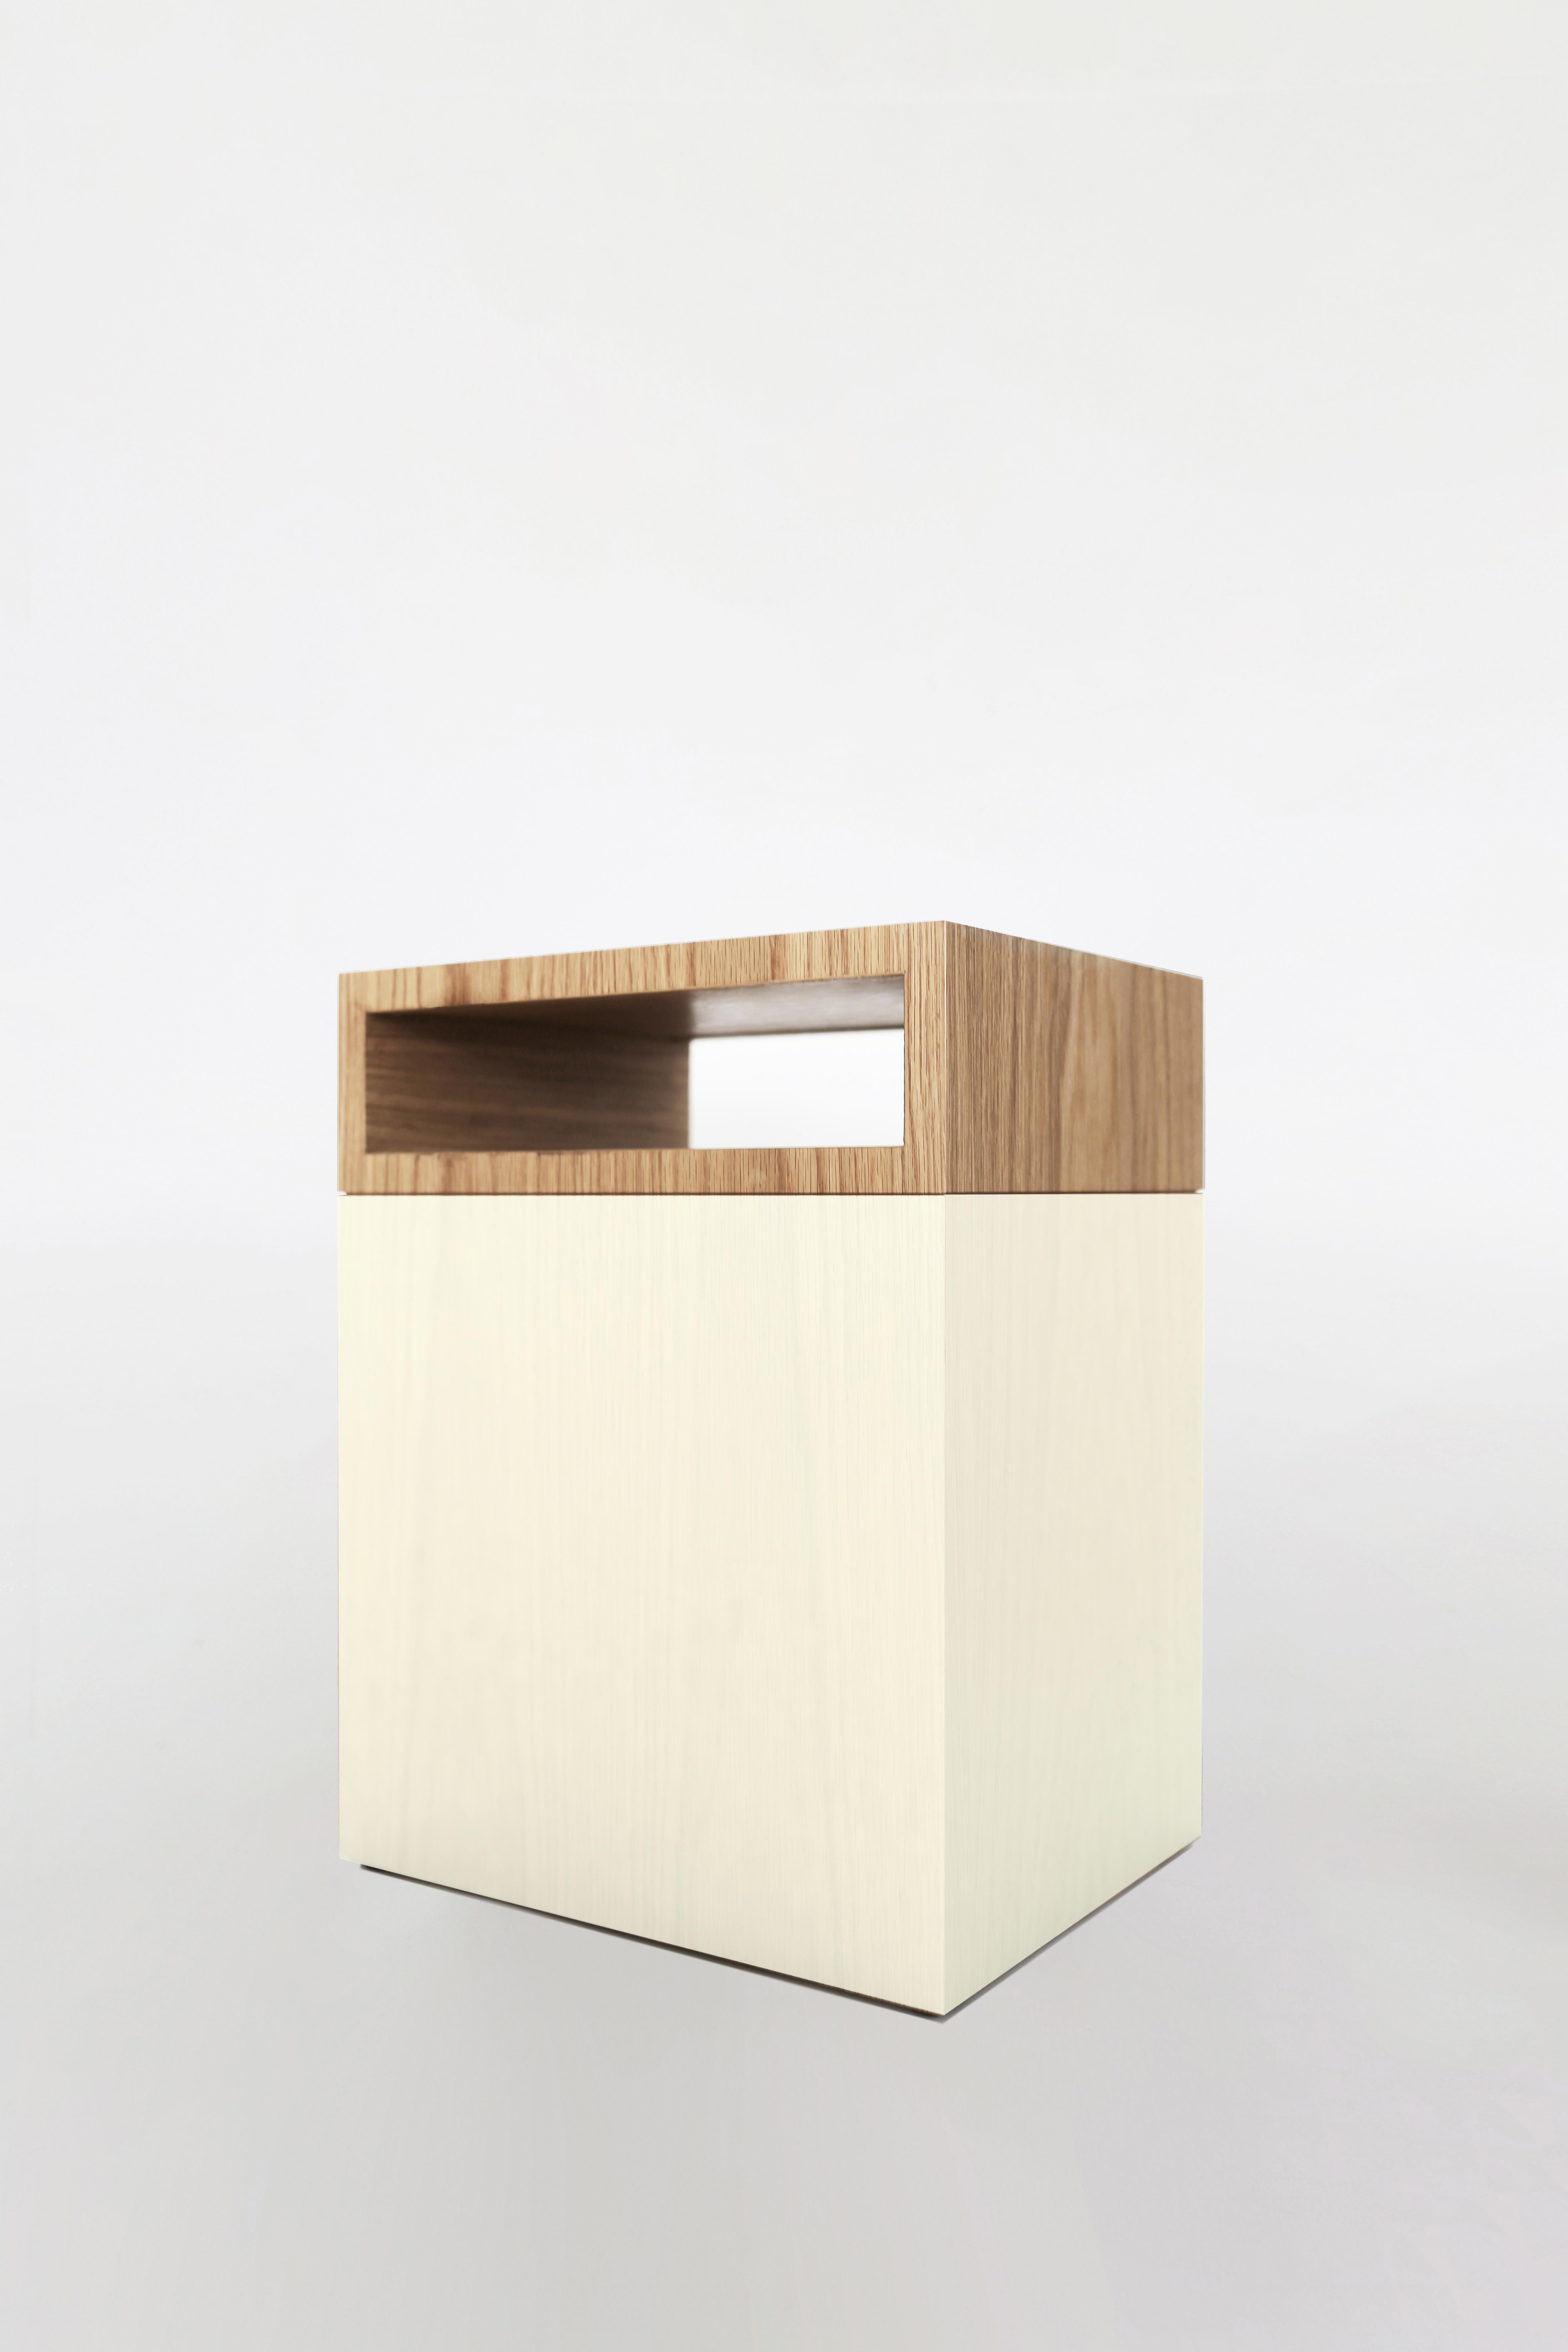 Orphan Work 101 Side Table
Shown in oak and white or off-white
Available in natural oak with painted base.
Measures: 13” W x 10.25” D x 17” H

Orphan work is designed to complement in the heart of Soho, New York City. Each piece is handmade in New